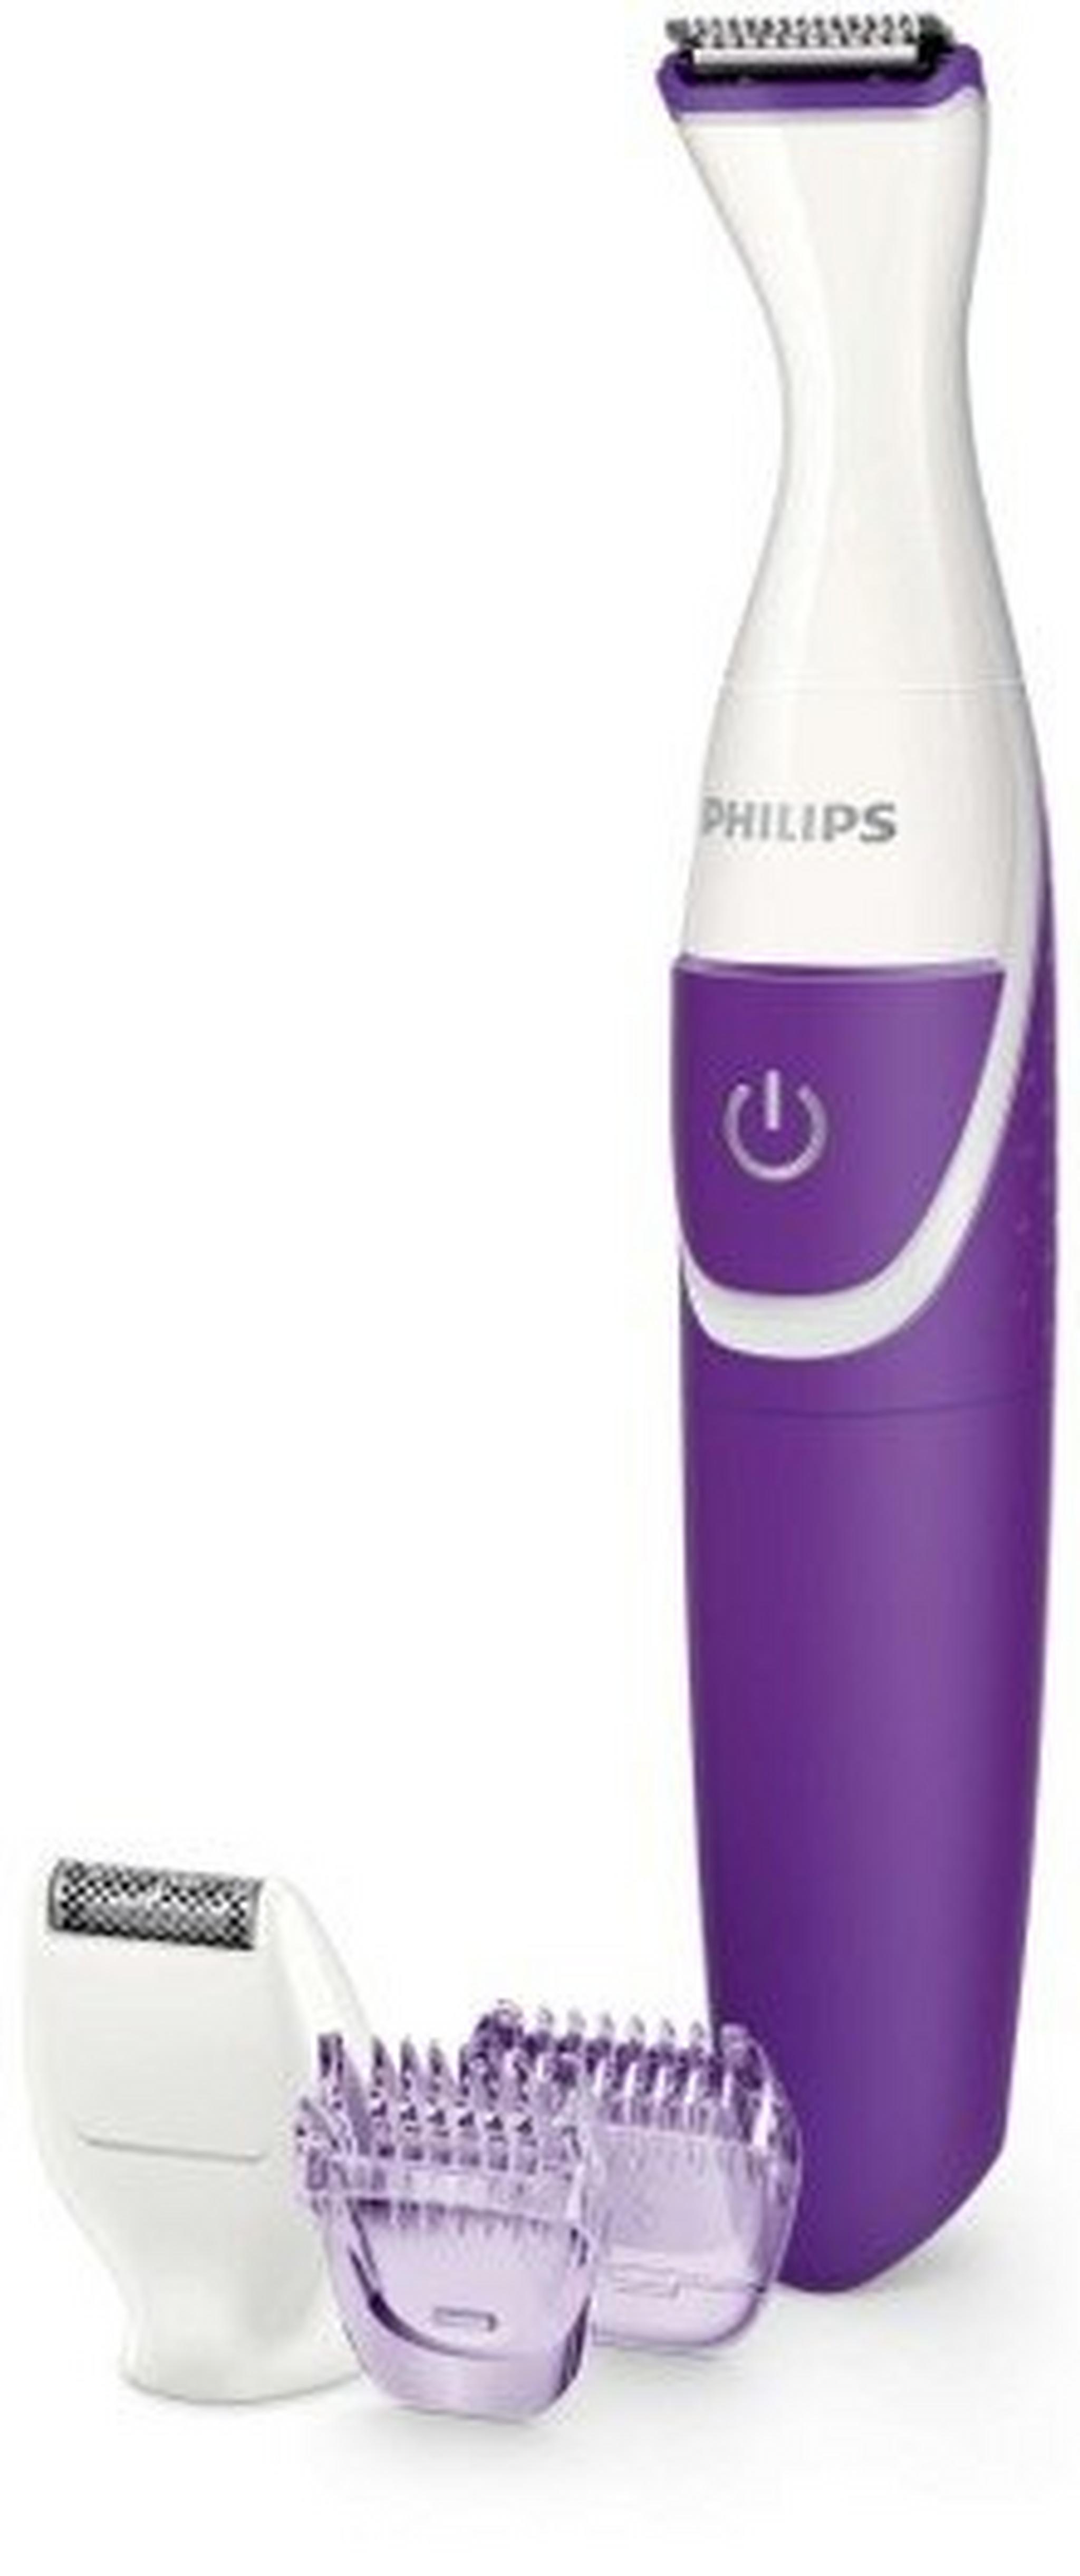 Philips Bikini Trimmer for An Even, Neatly-Groomed without Nicks or Cuts, BRT383/15 - White/Violet